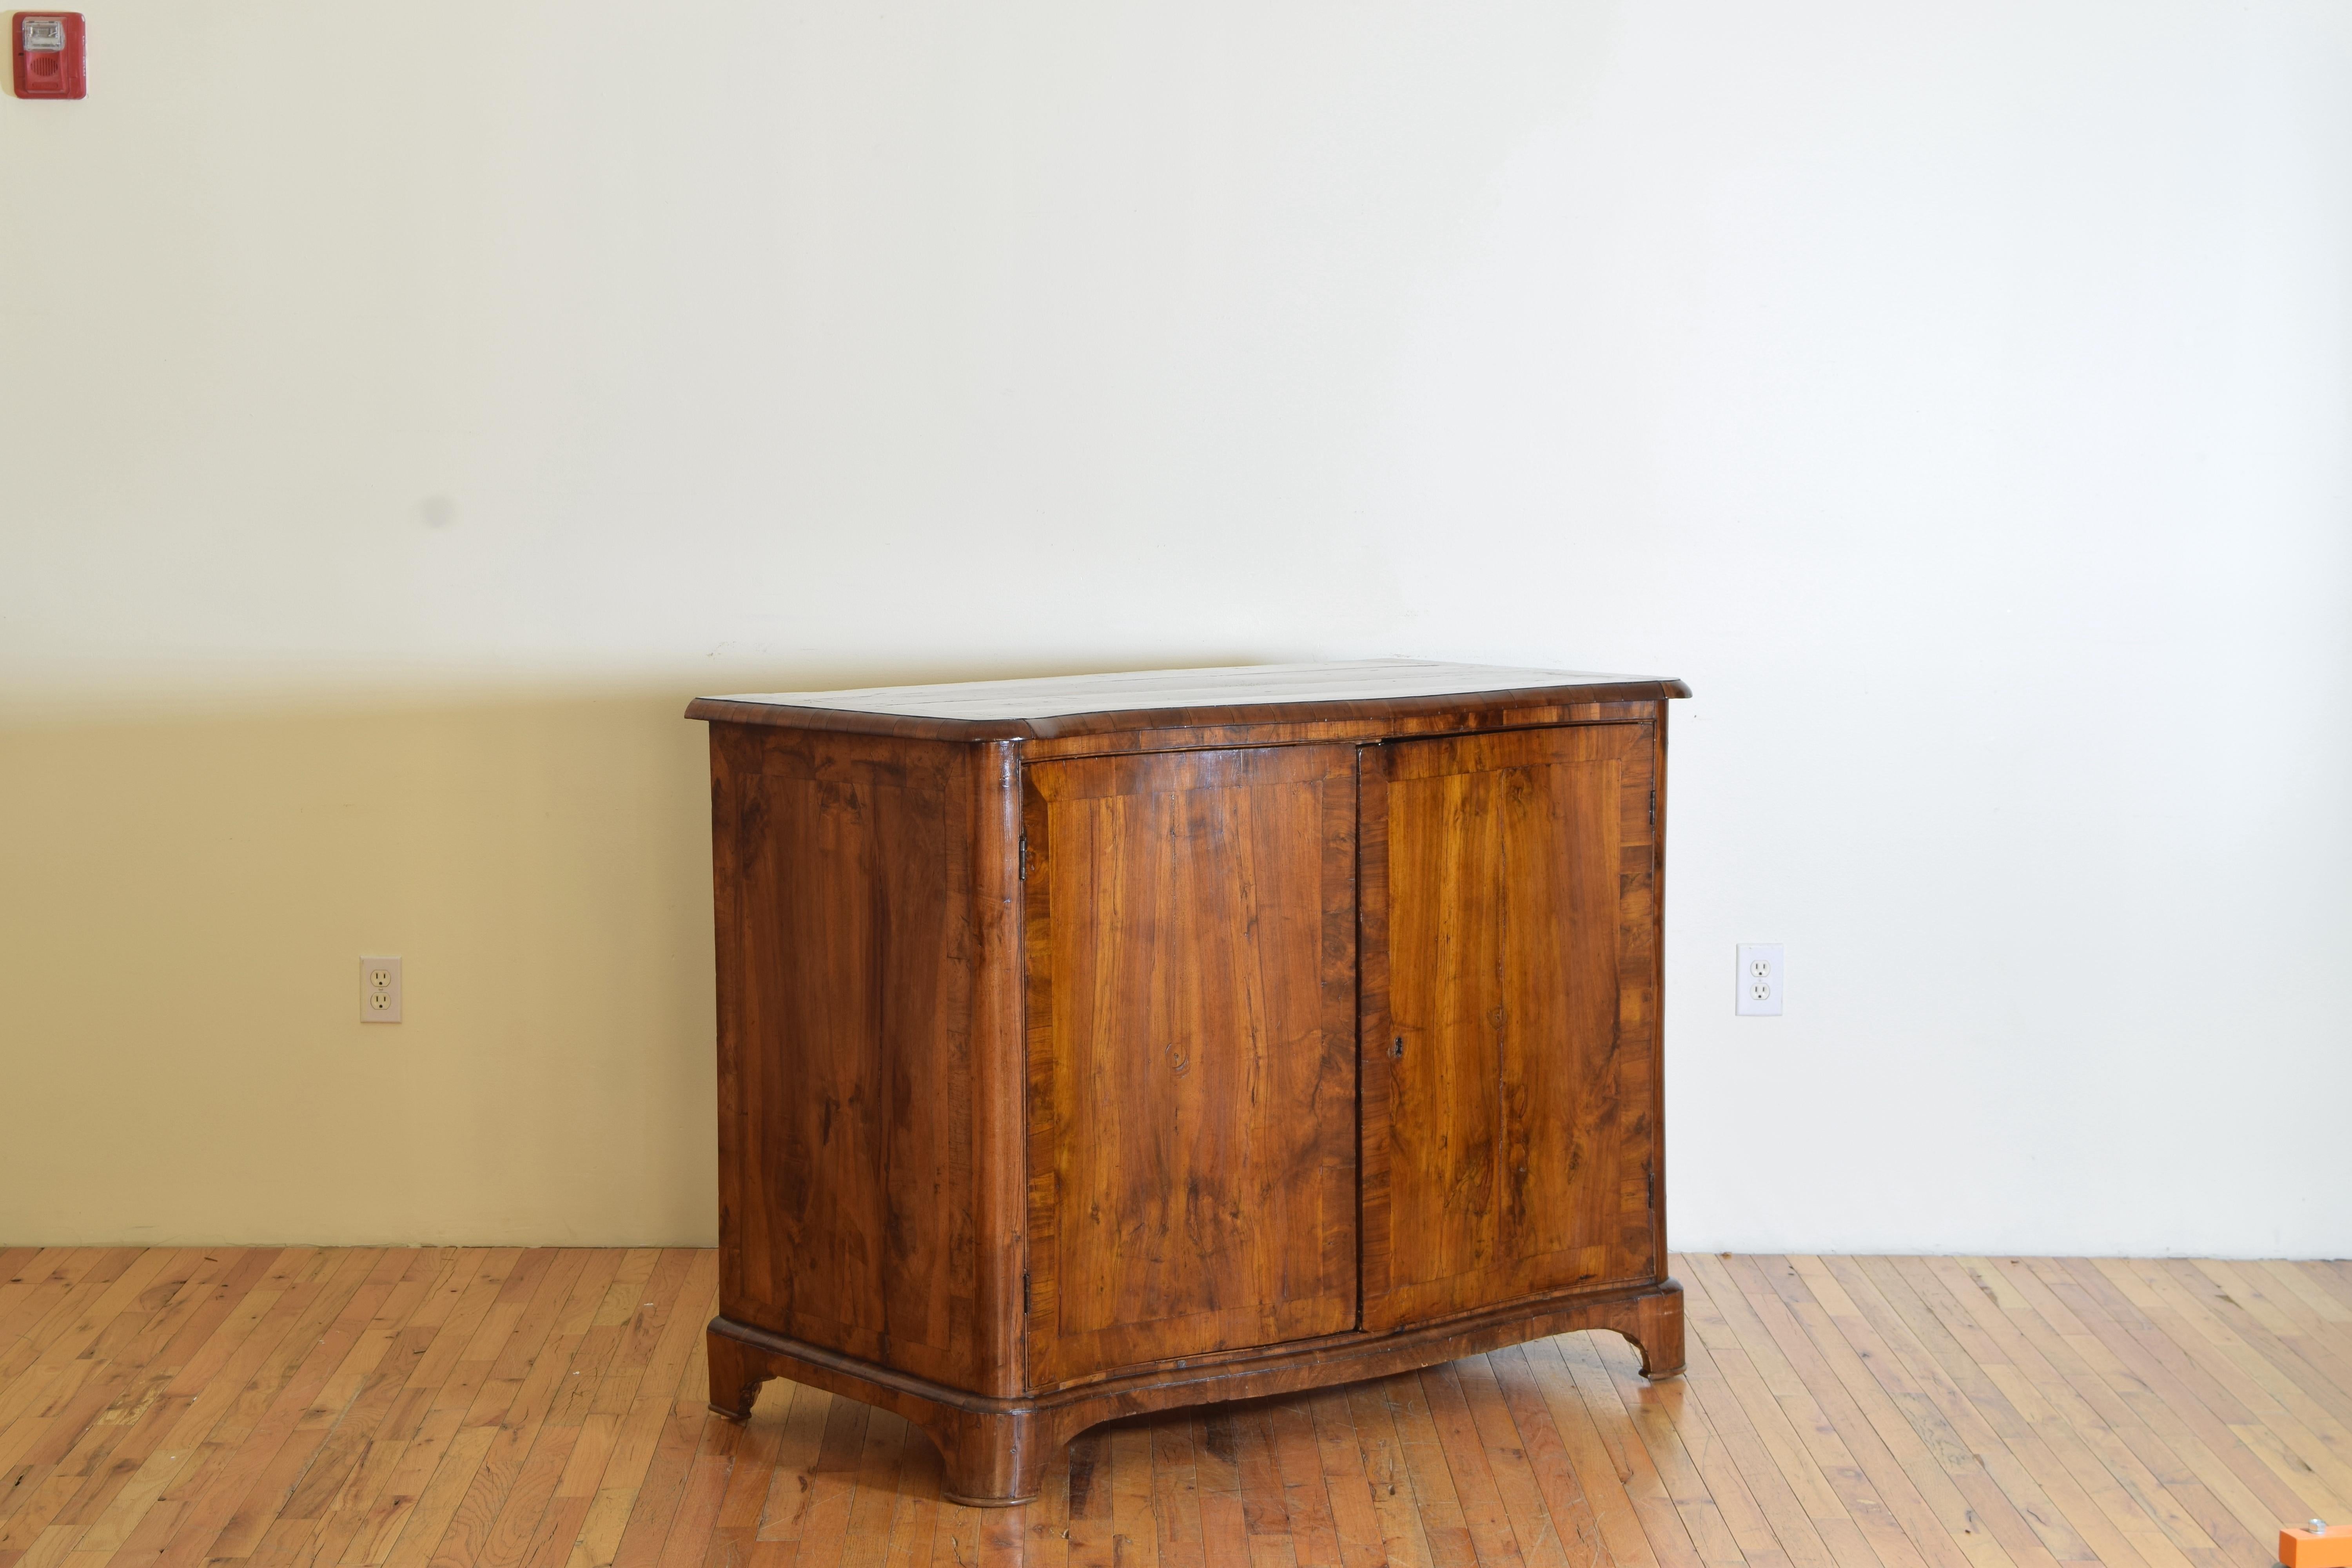 A walnut and veneered walnut banded inlay sideboard or cabinet having a slight bombe or curved front resting on open bracket feet. The interior having sizable depth and slides instead of drawers for storage.
 